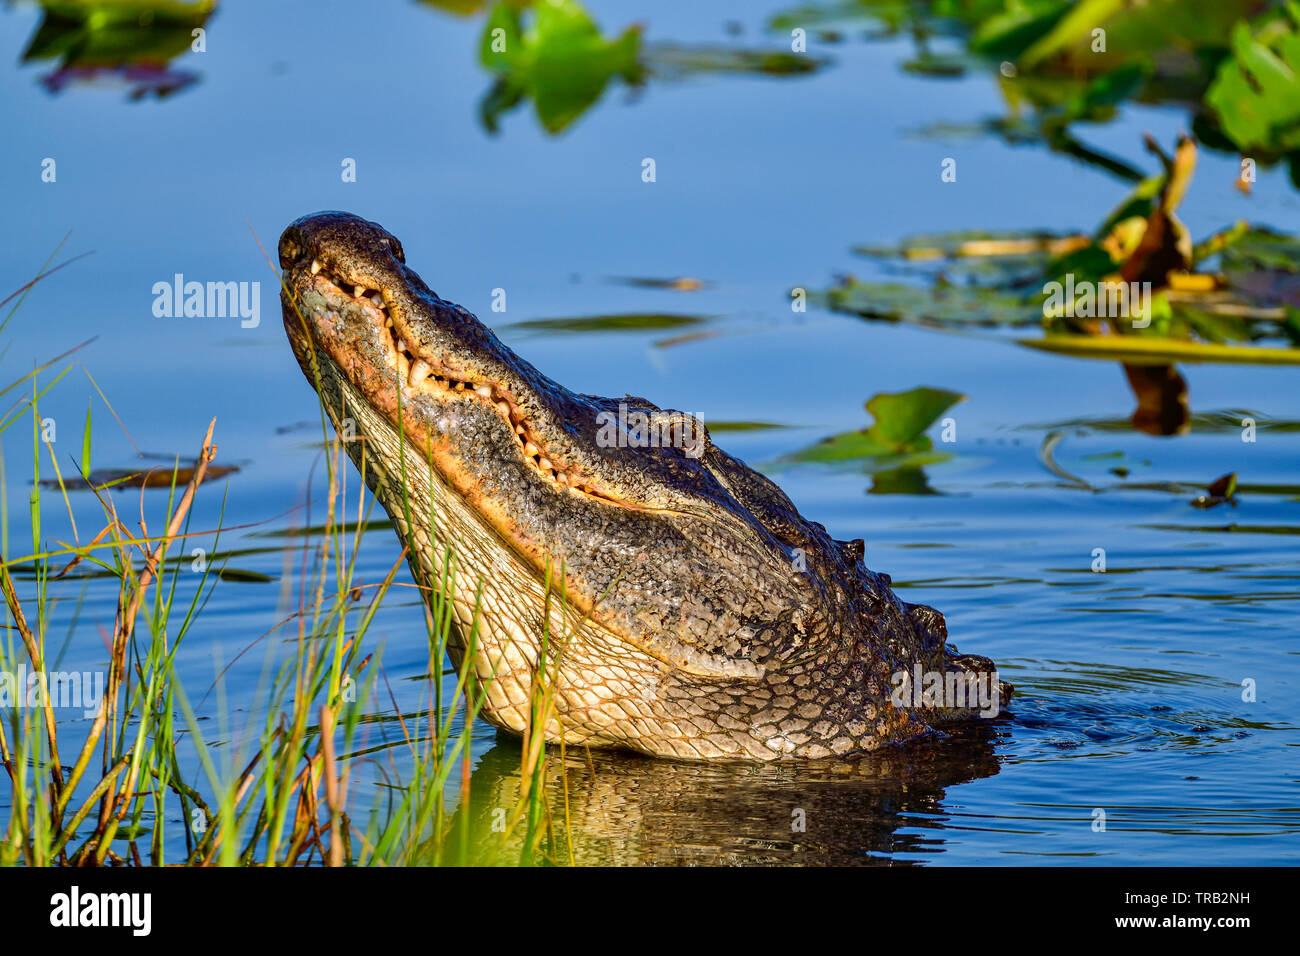 It was time of the year when male alligators roar and make bellowing sounds. Stock Photo